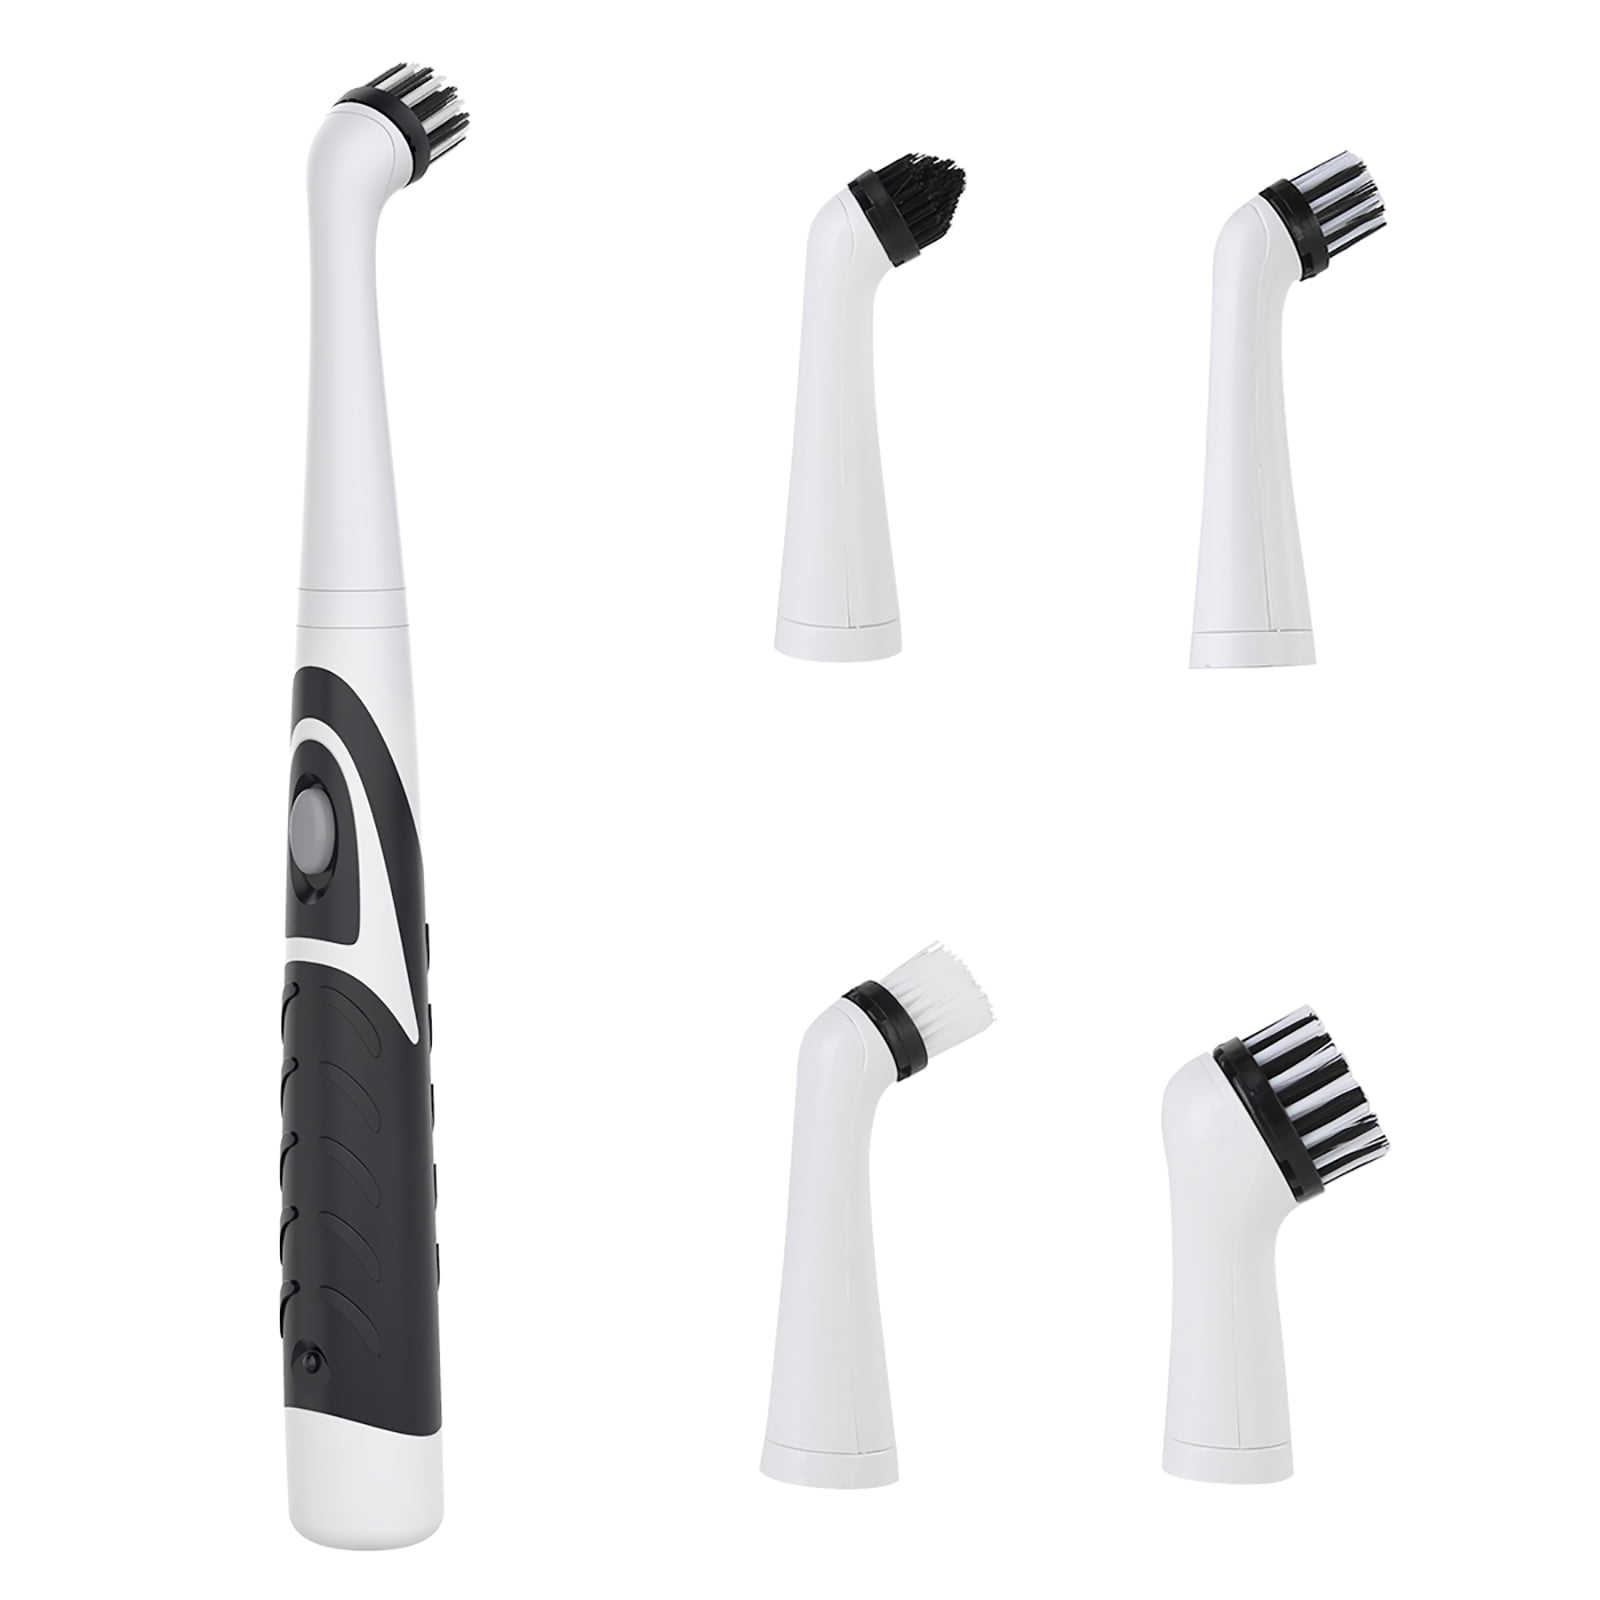 4 In 1 Electric Sonic Scrubber Cleaning Brush Household Cleaner Brush With  4 Brush Heads Brew - AliExpress